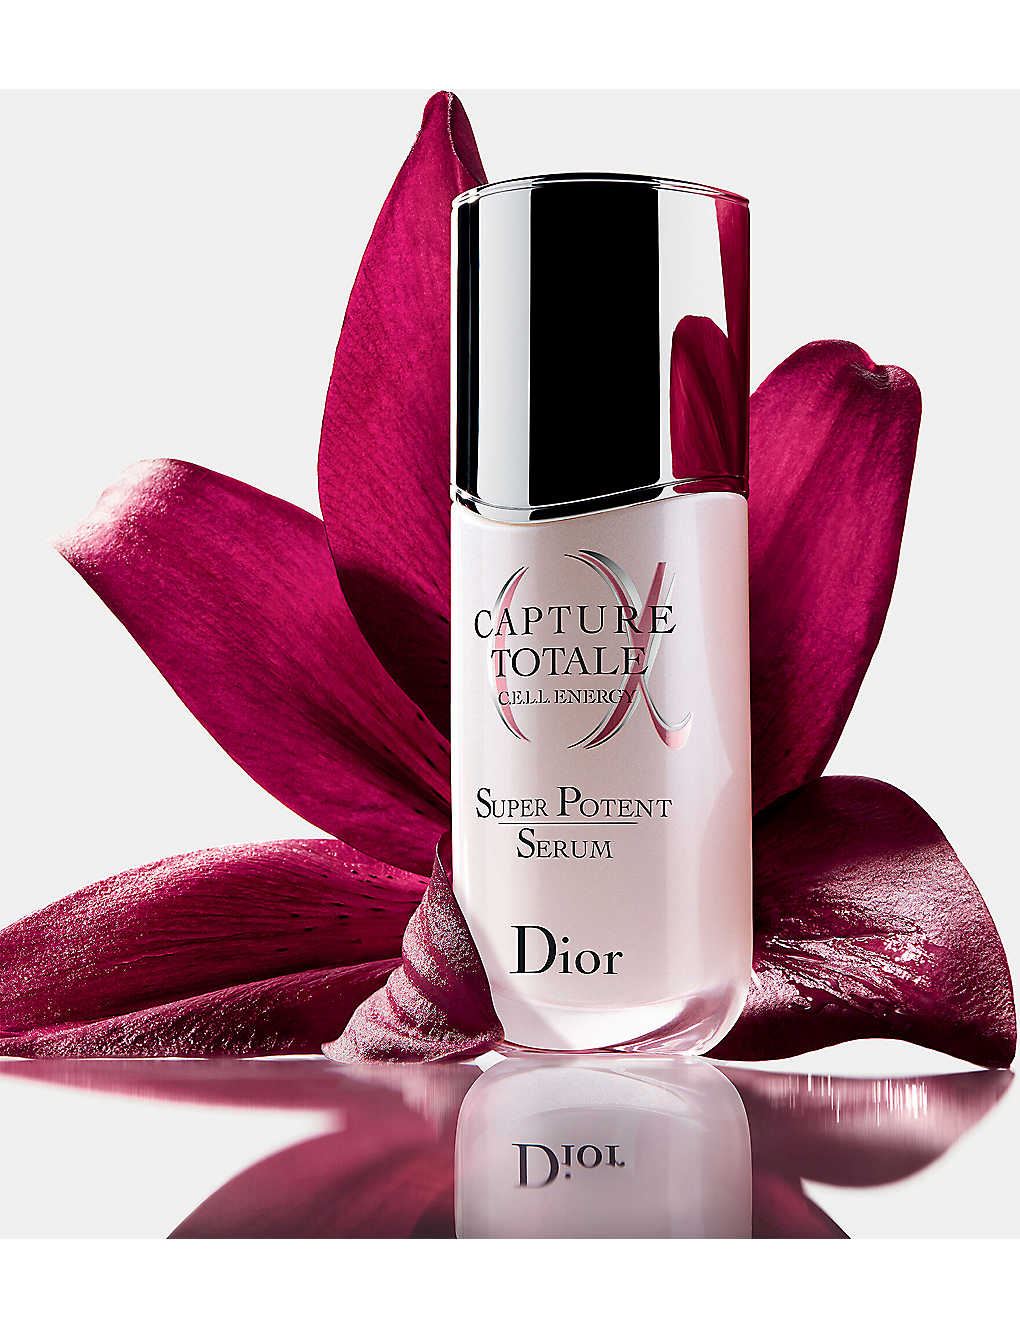 Dior Capture Totale Total Age-Defying Skincare Ritual Gift Set